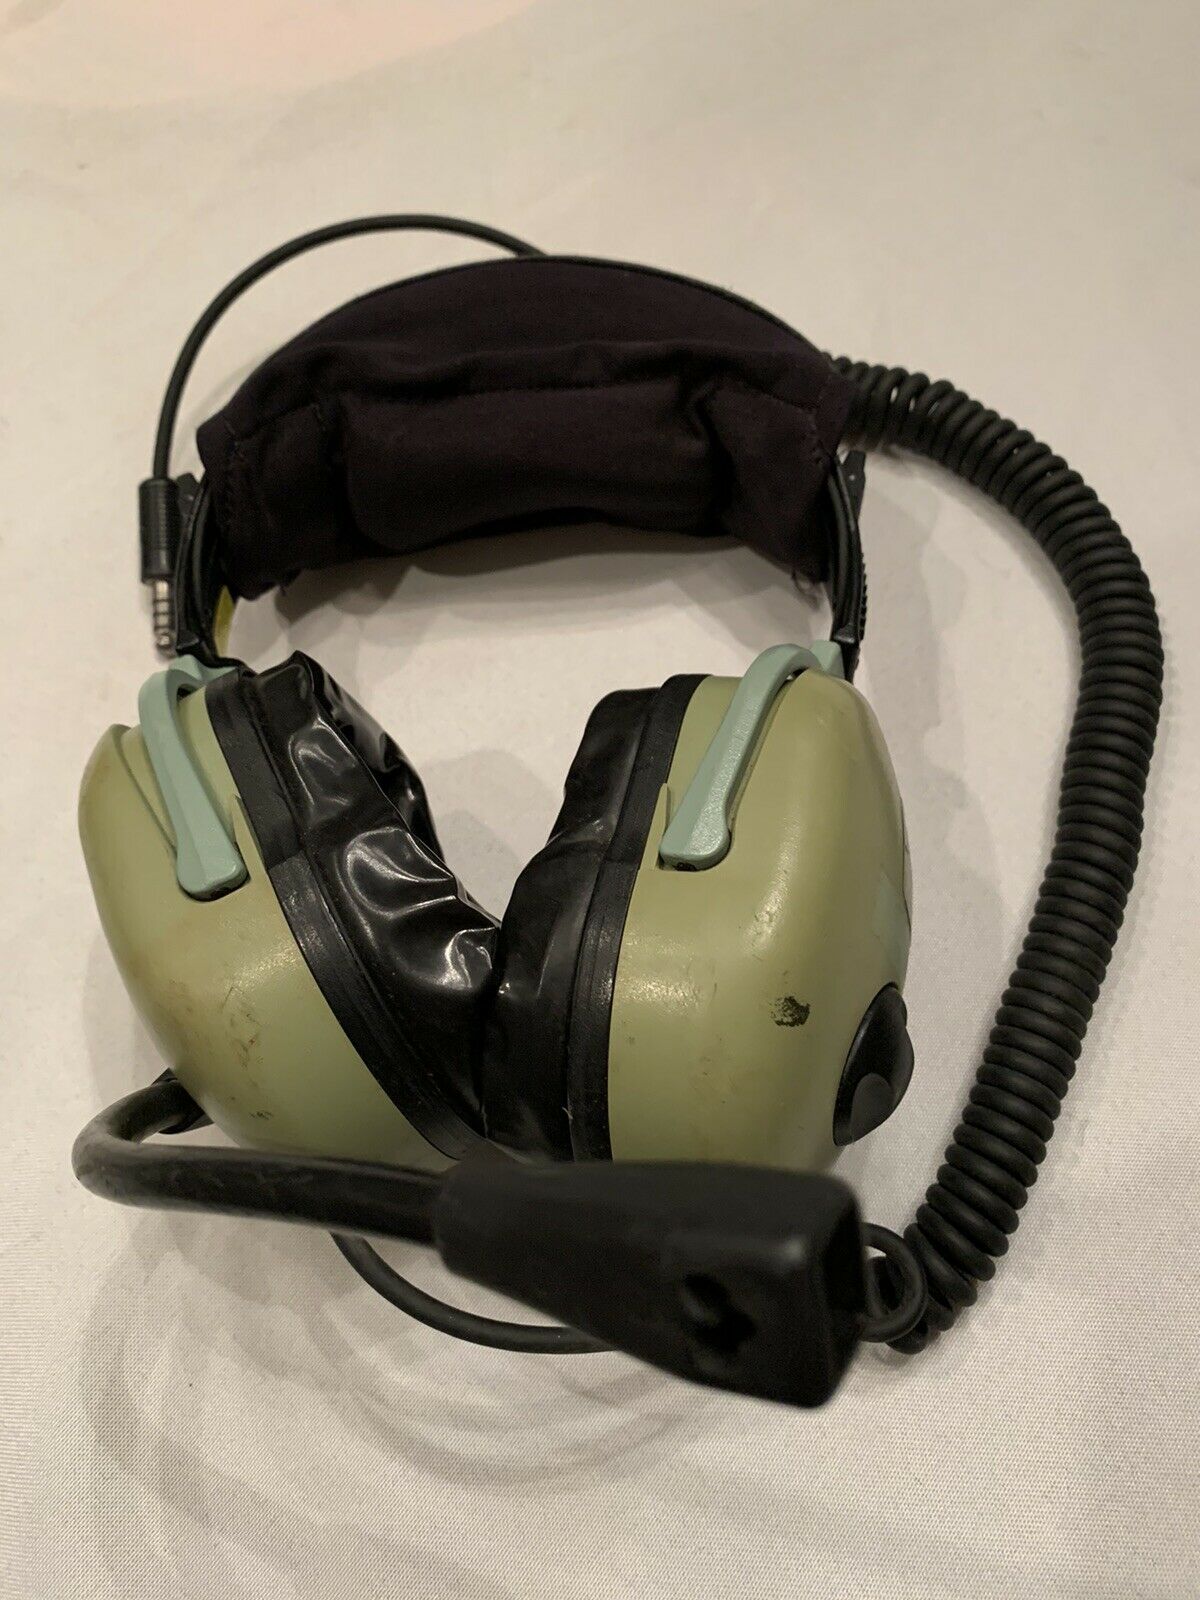 David Clarke Headset Model H20-16 Used Not Checked Military Issue Surplus